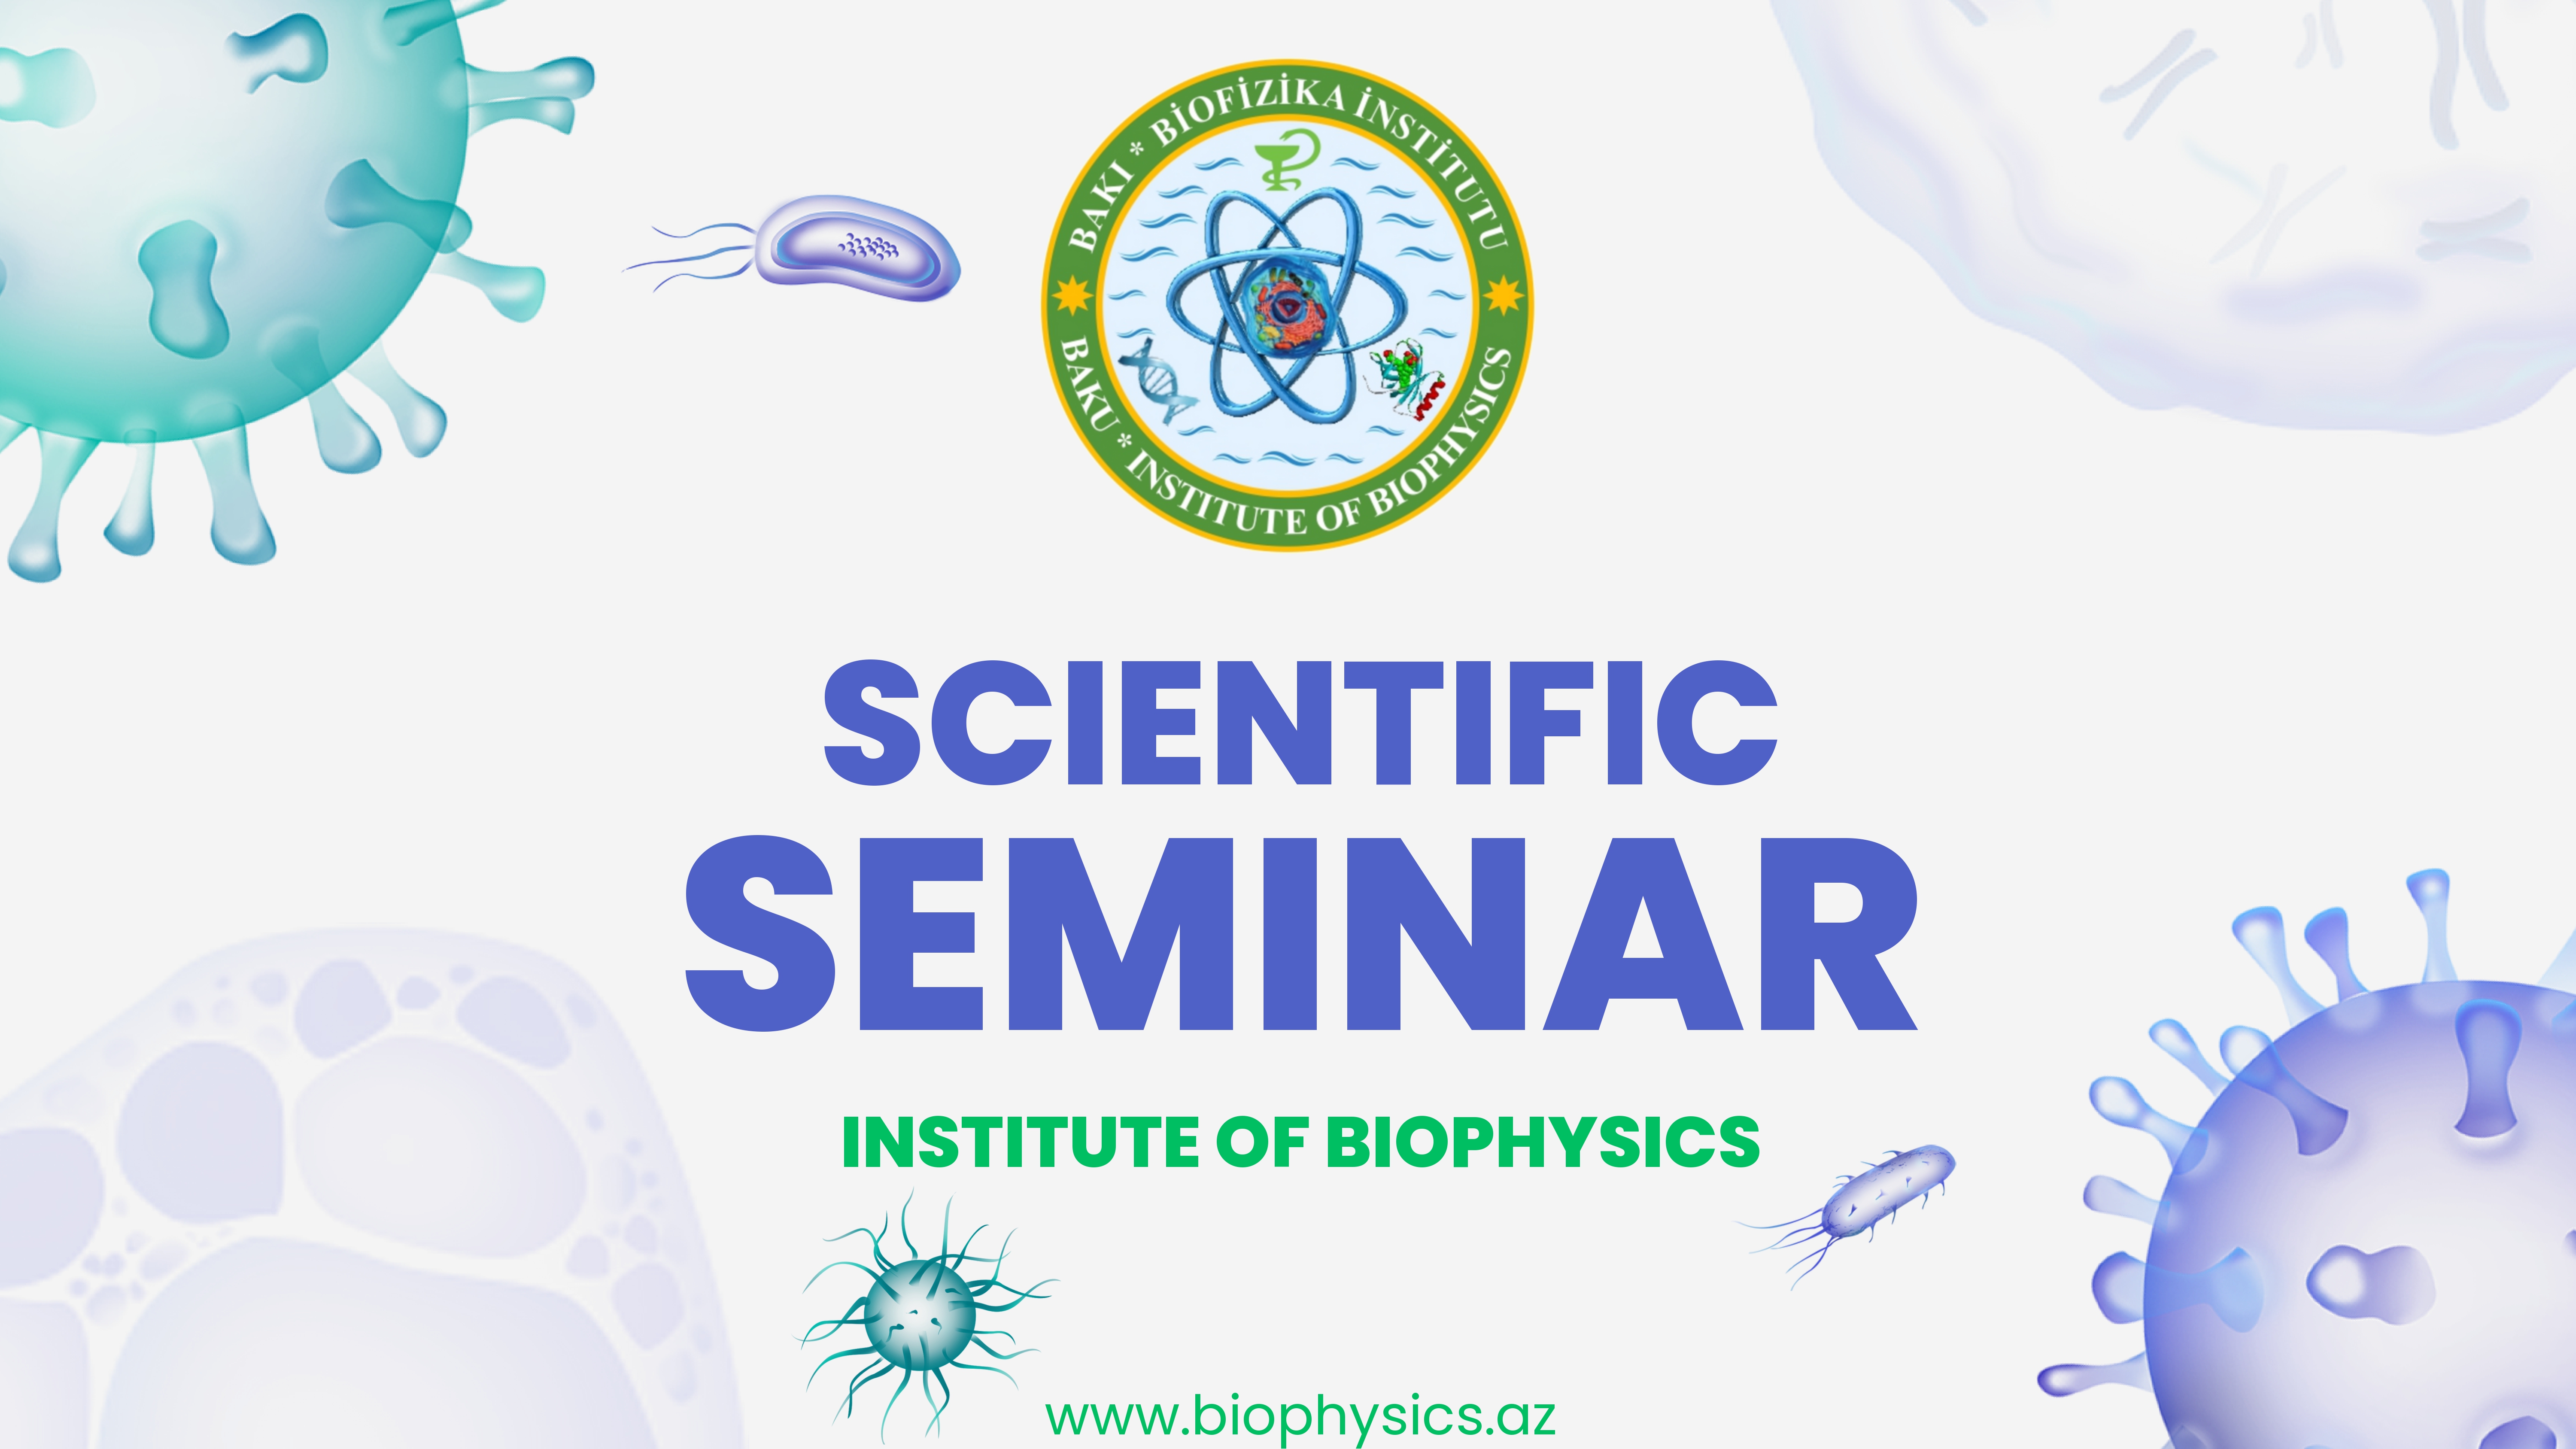 An informative seminar on the effective use of the SCOPUS scientific database will be held at the Institute of Biophysics